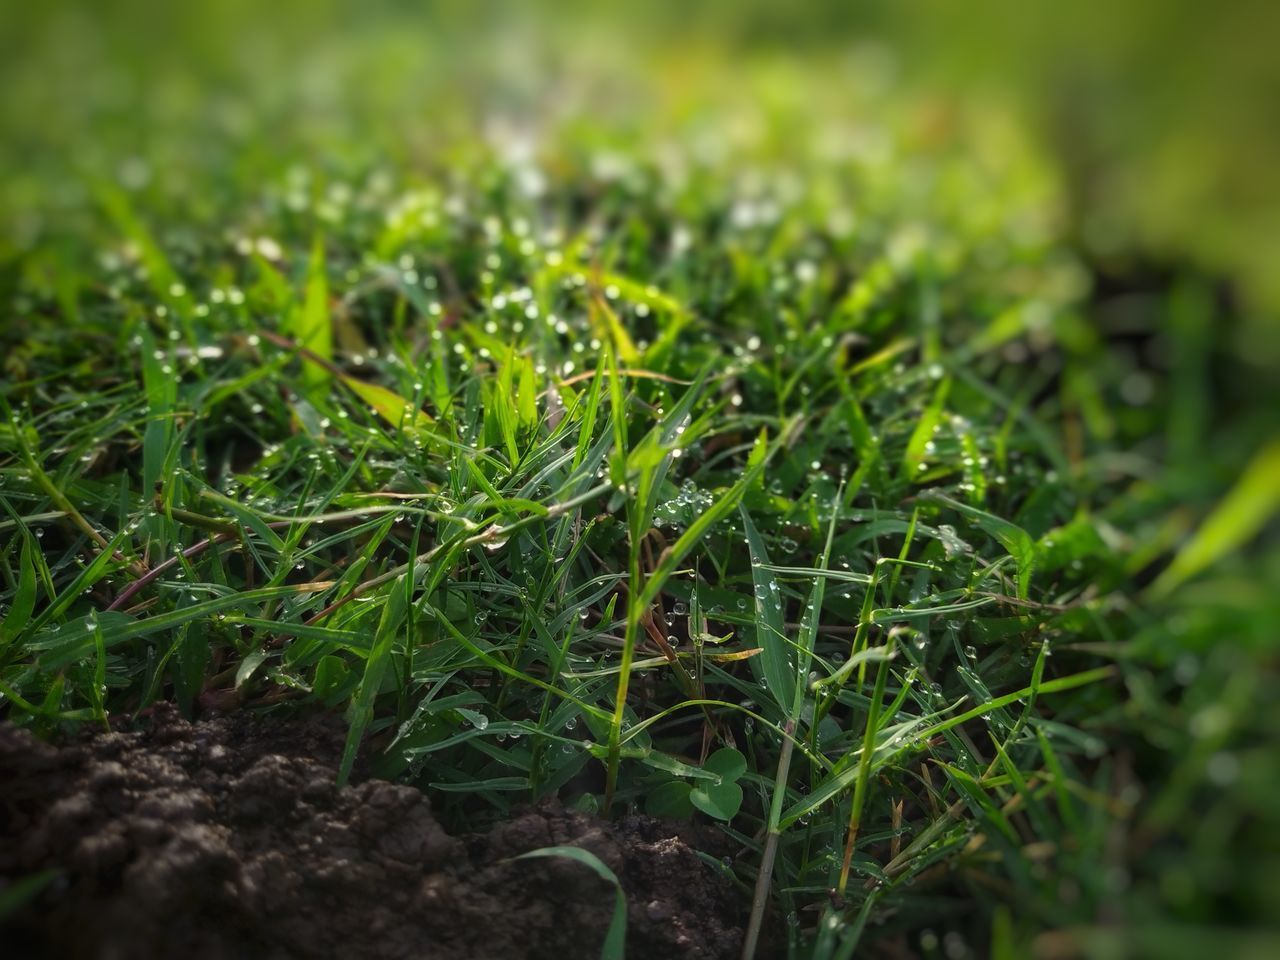 CLOSE-UP OF WET PLANTS GROWING ON FIELD